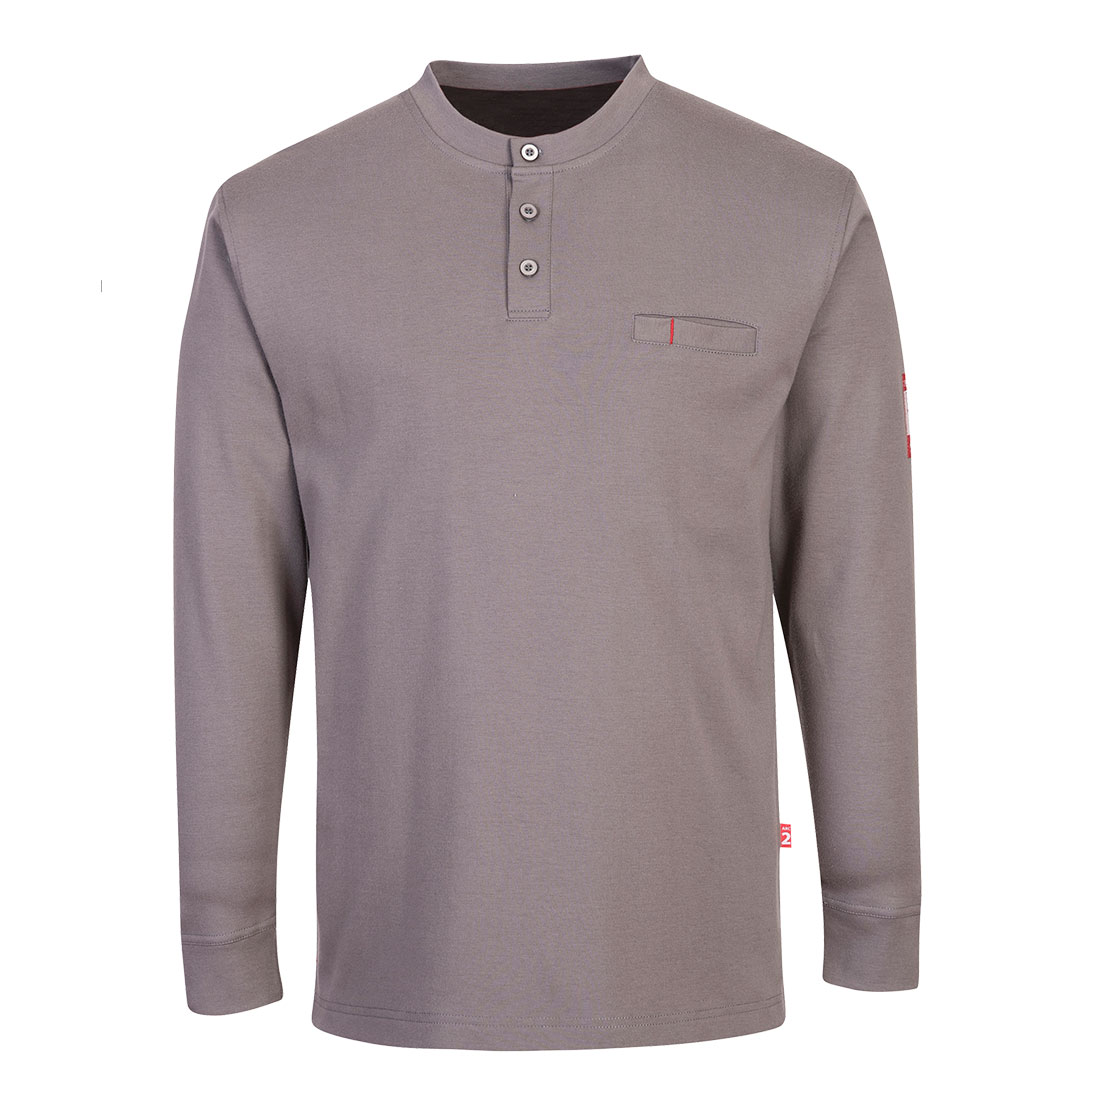 Flame Resistant, T-Shirts, Polos and Shirts